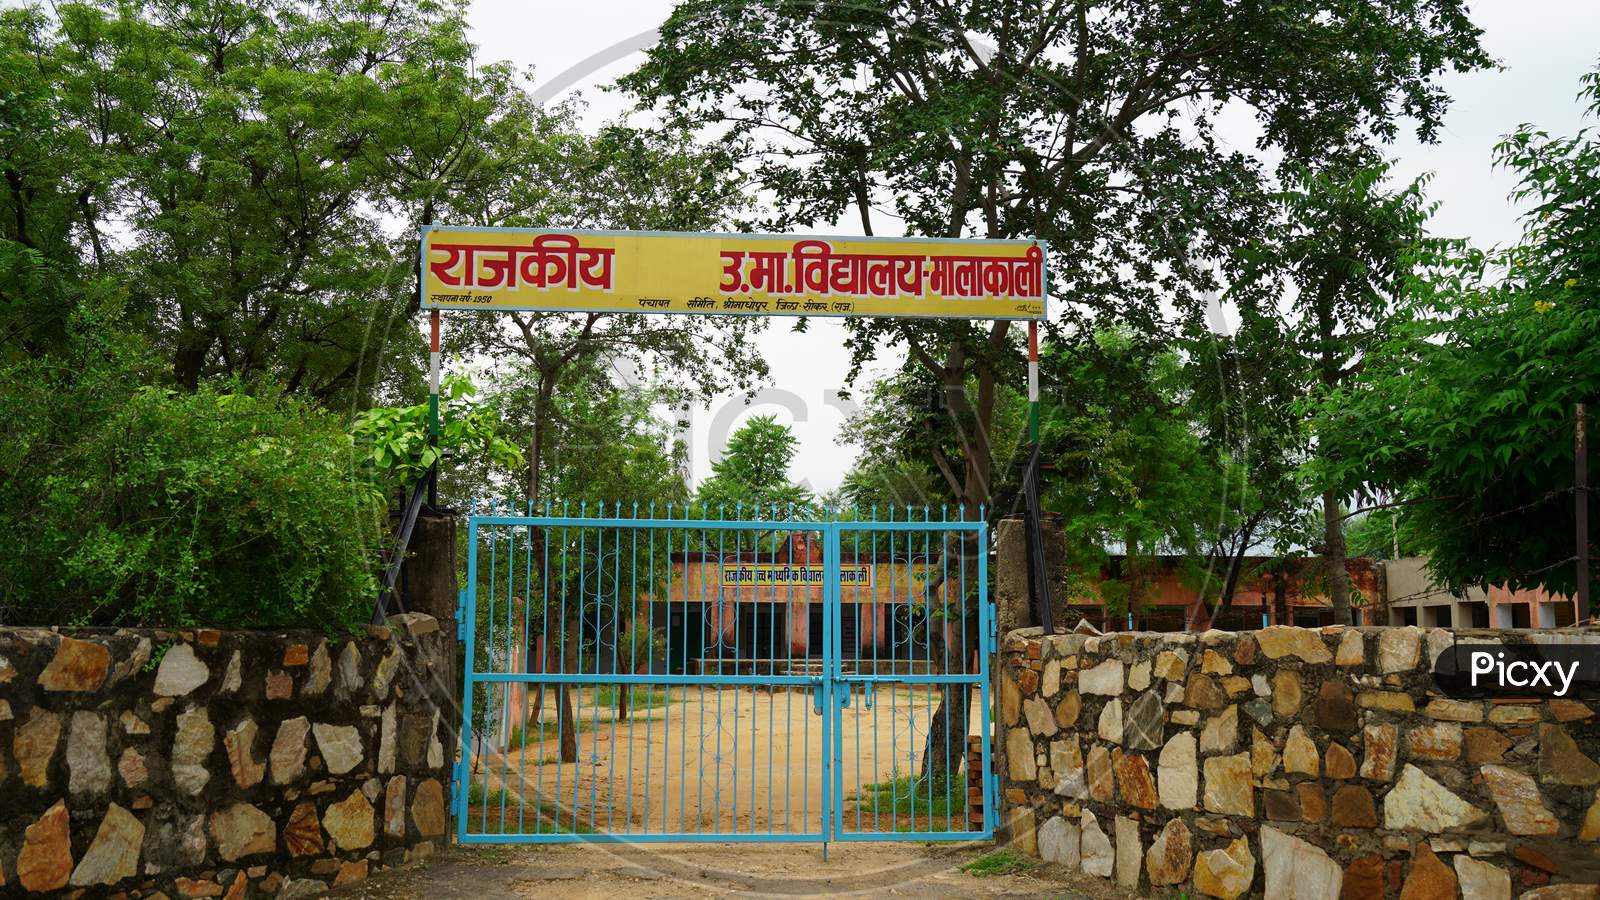 Rear view green colored open Iron gate of school. Stylish enter gate to move forward in the school.